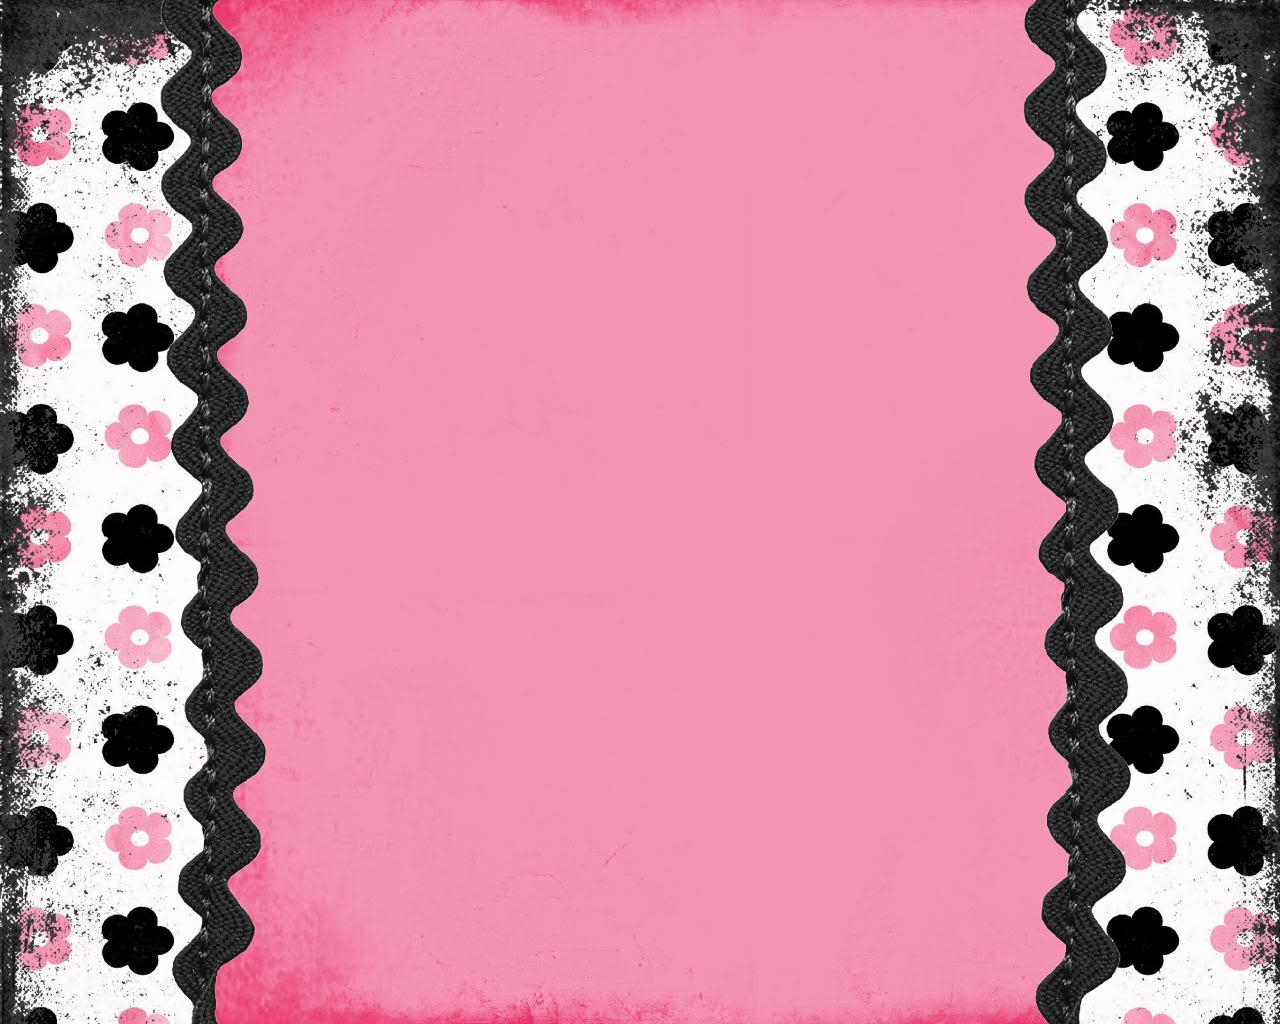 Black and pink wallpaper borders 15 background, Love in pink